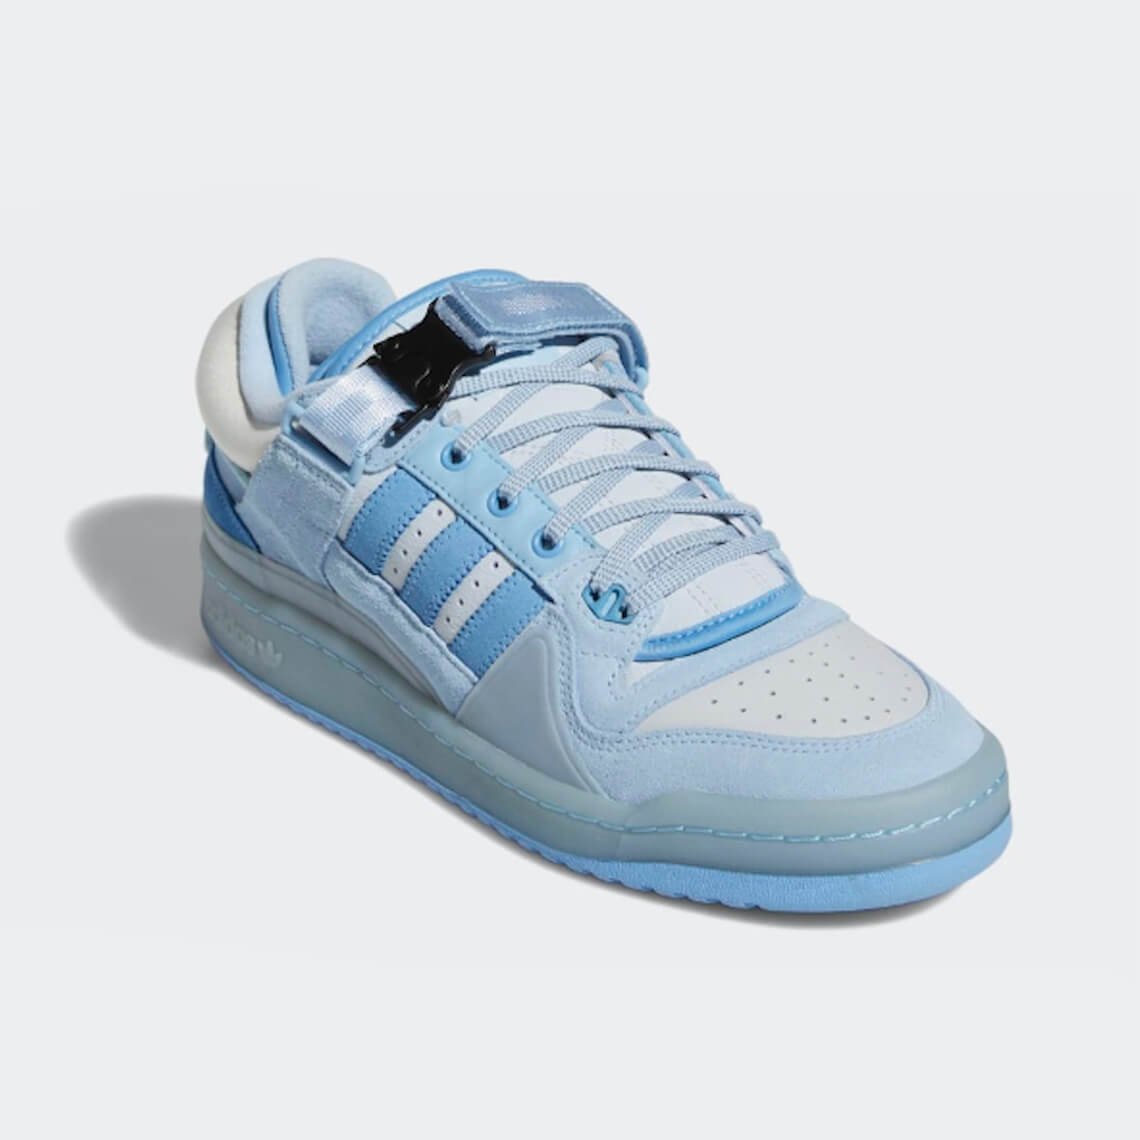 CNK-bad-bunny-adidas-forum-buckle-low-blue-tint-front.jpeg